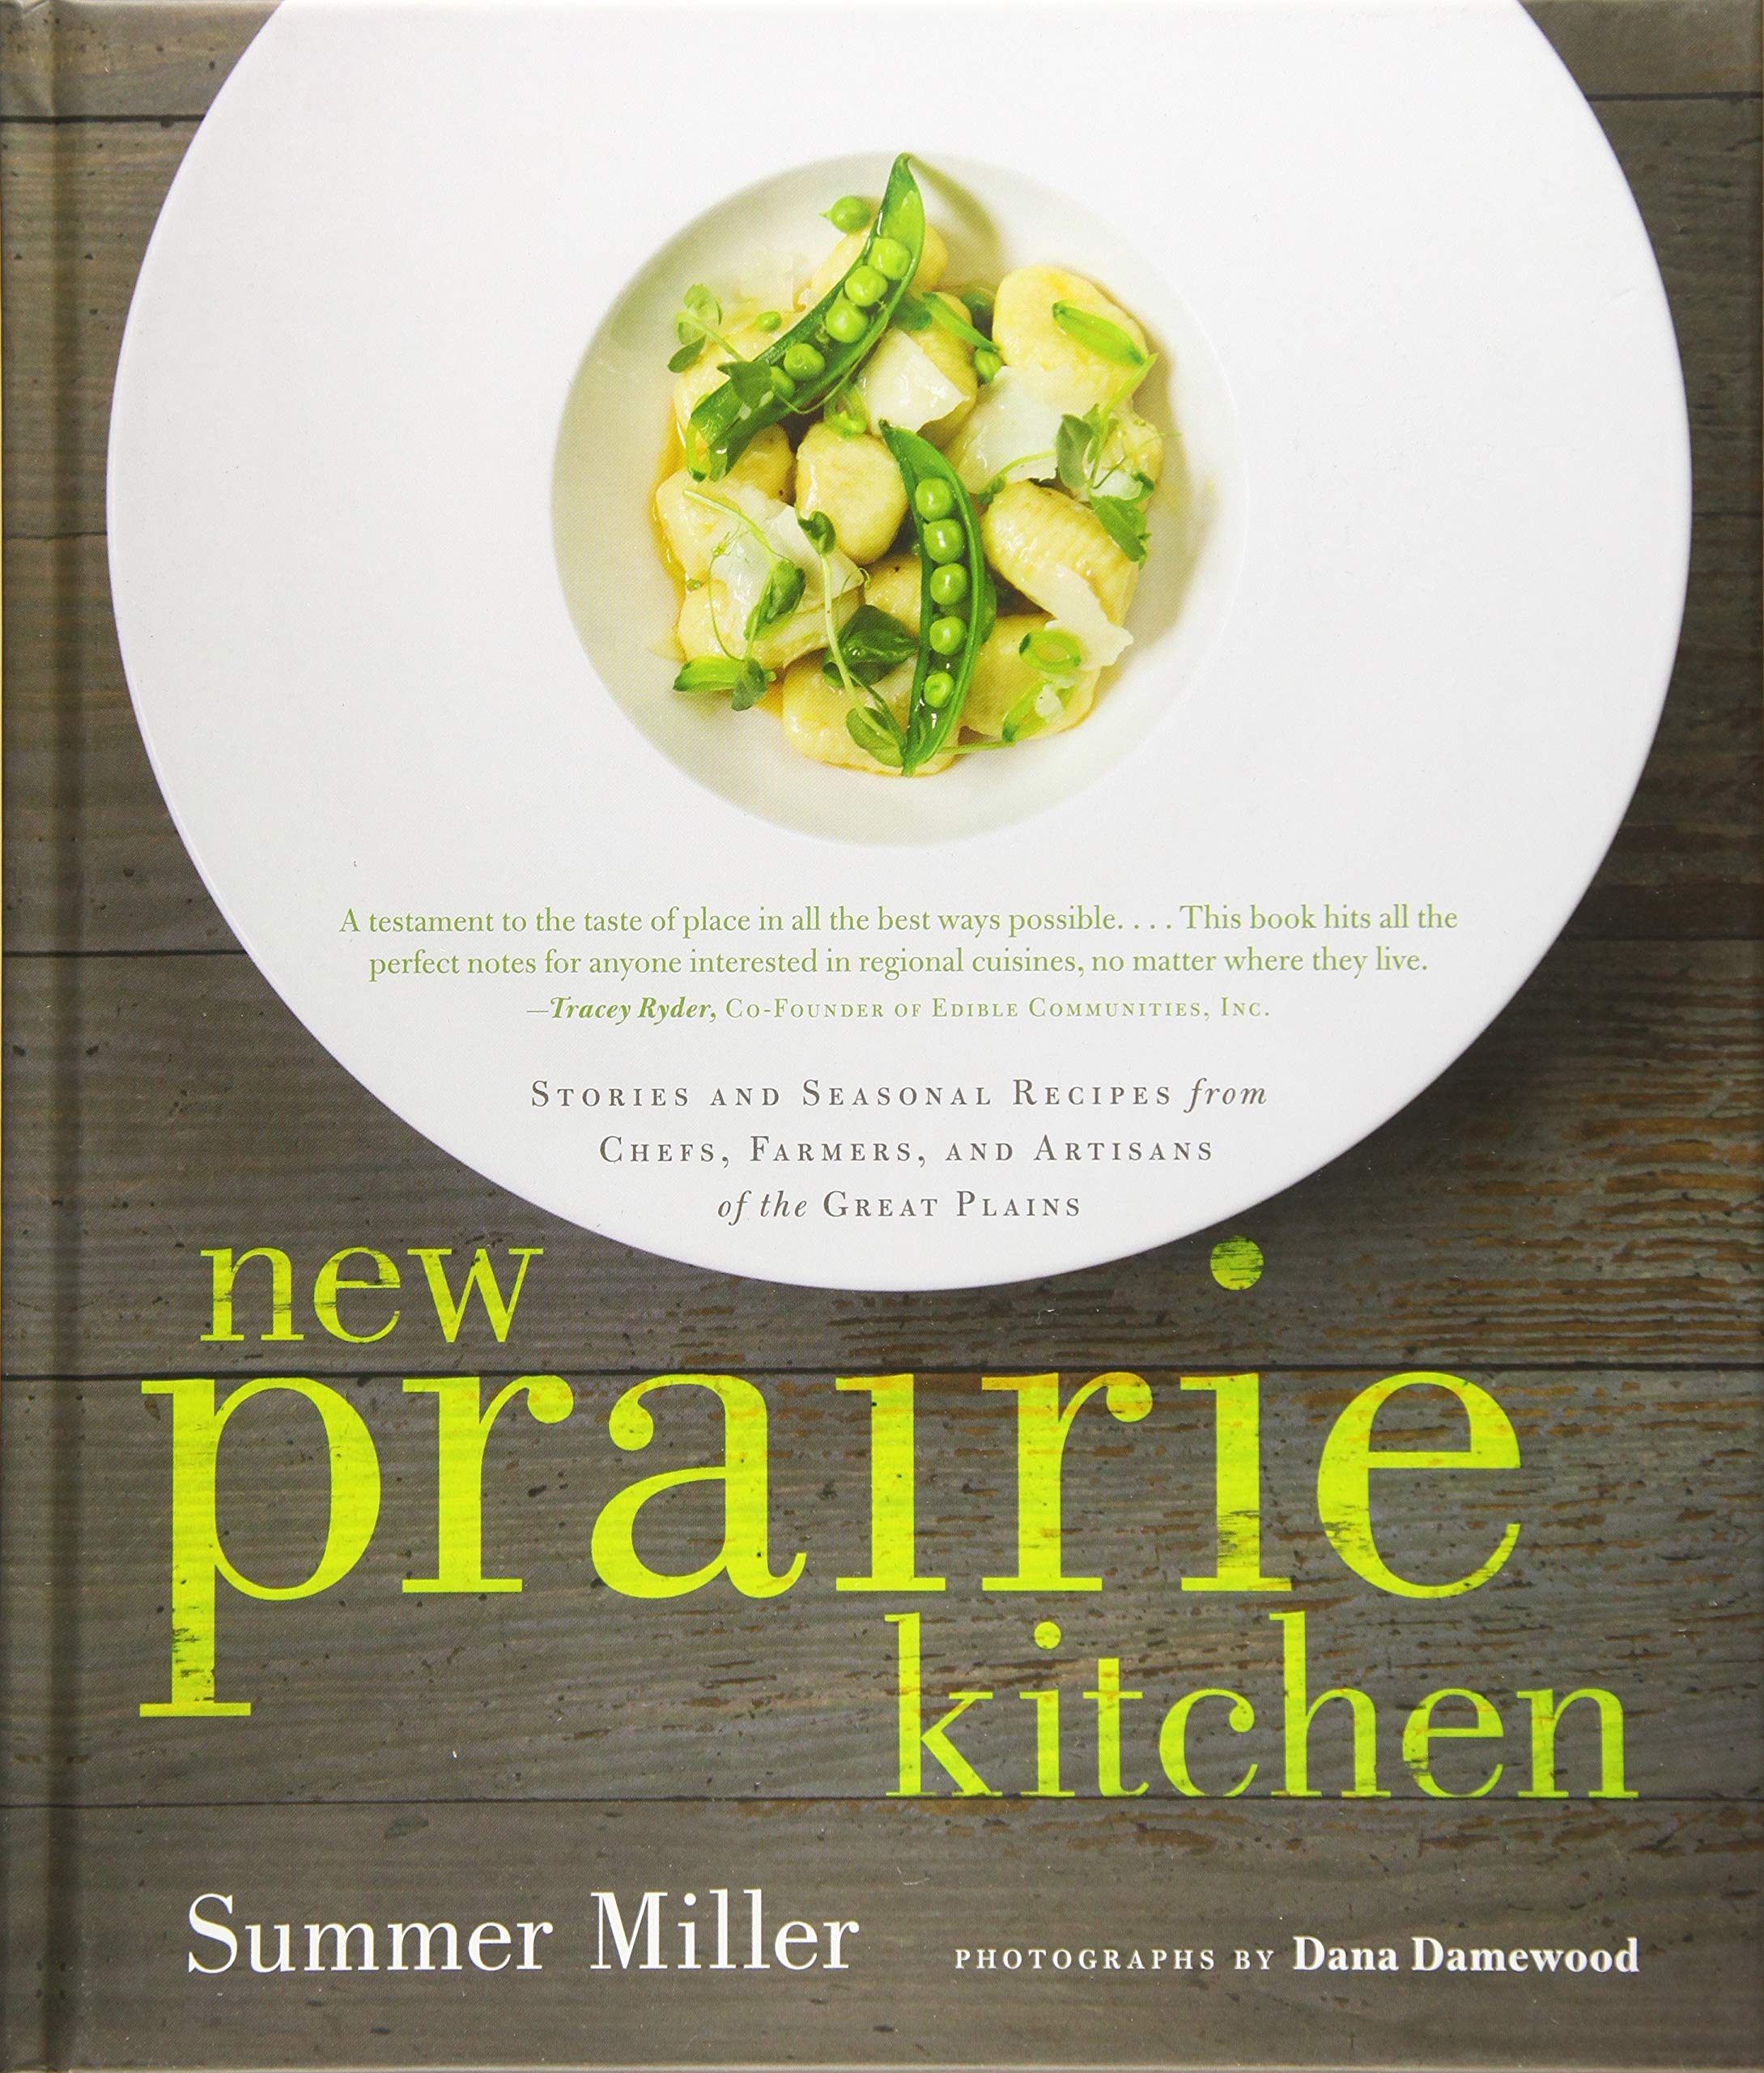 SALE! (Midwest) Summer Miller. New Prairie Kitchen: Stories and Seasonal Recipes from Chefs, Farmers, and Artisans of the Great Plains.